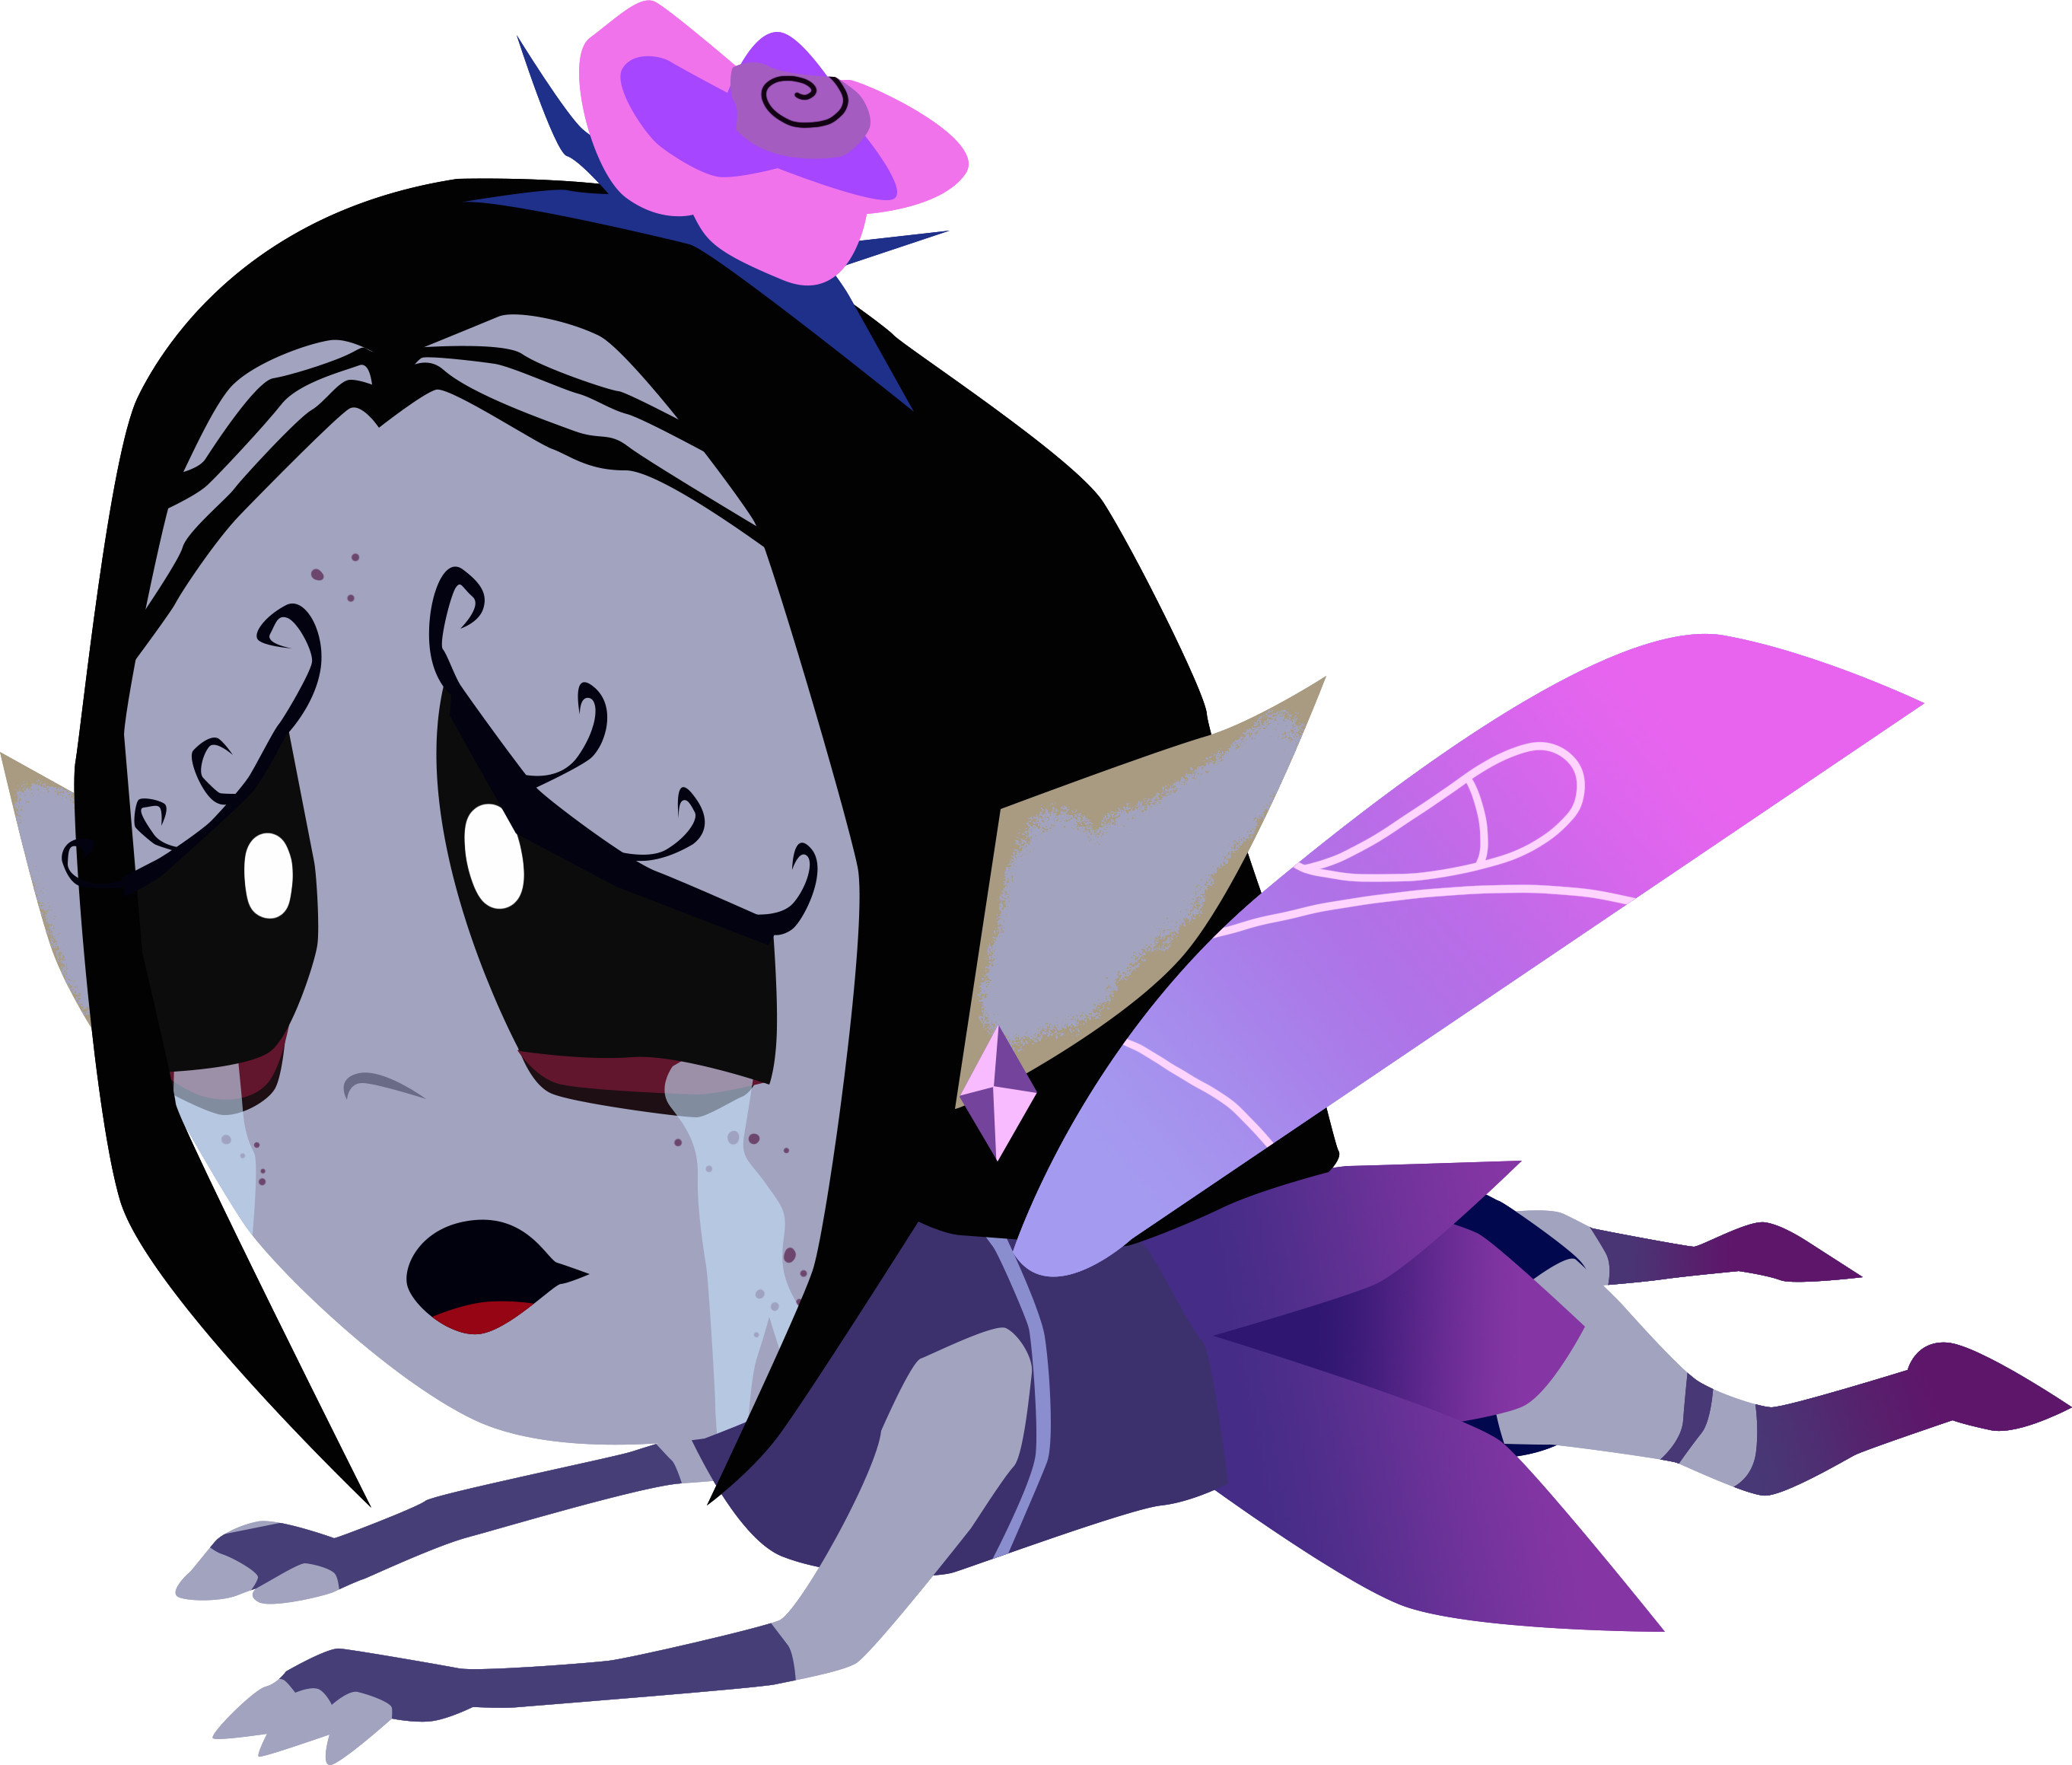 Misery from Ruby Gloom as the Eldest Fab Fairy. She kind of tripped.